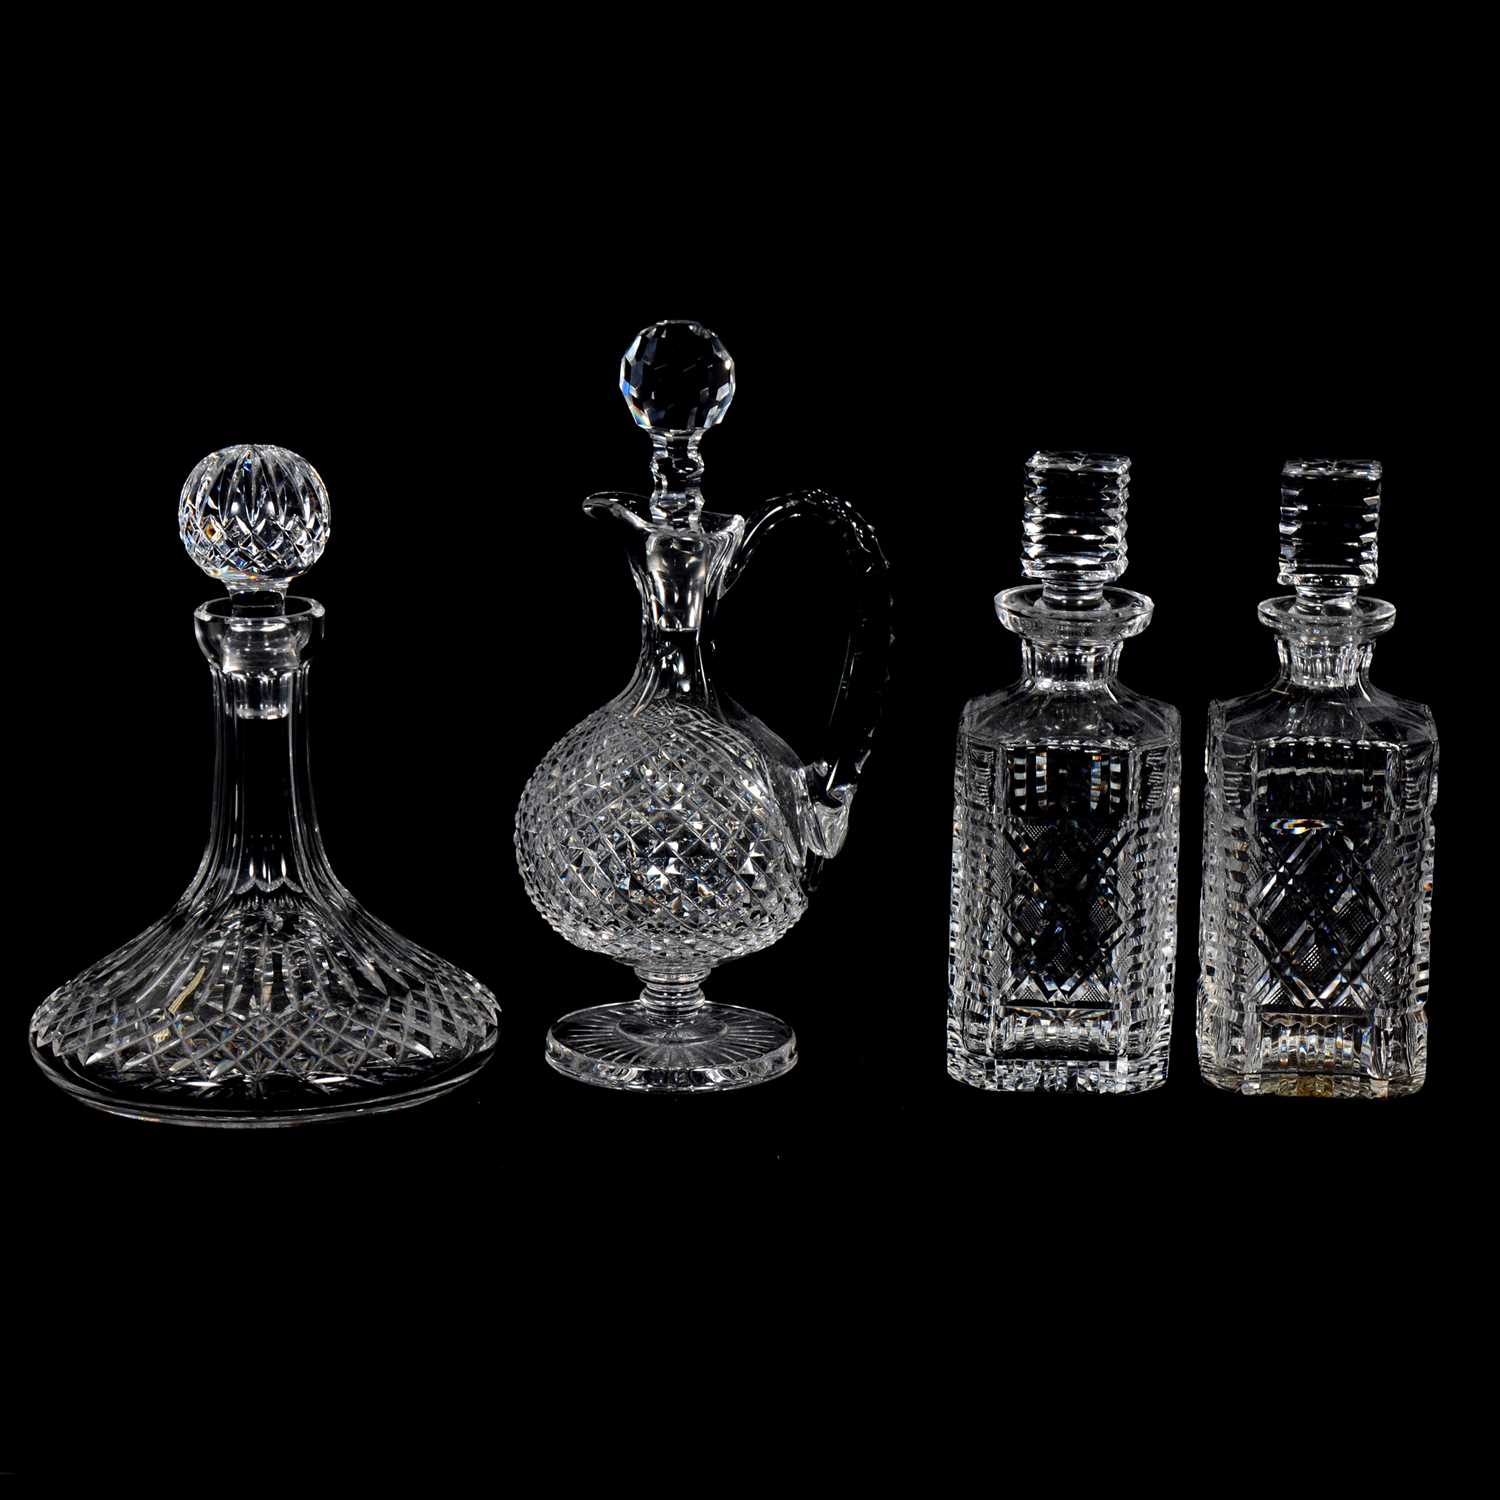 Lot 60 - Waterford Master Cutters claret jug, pair of decanters and ships decanter